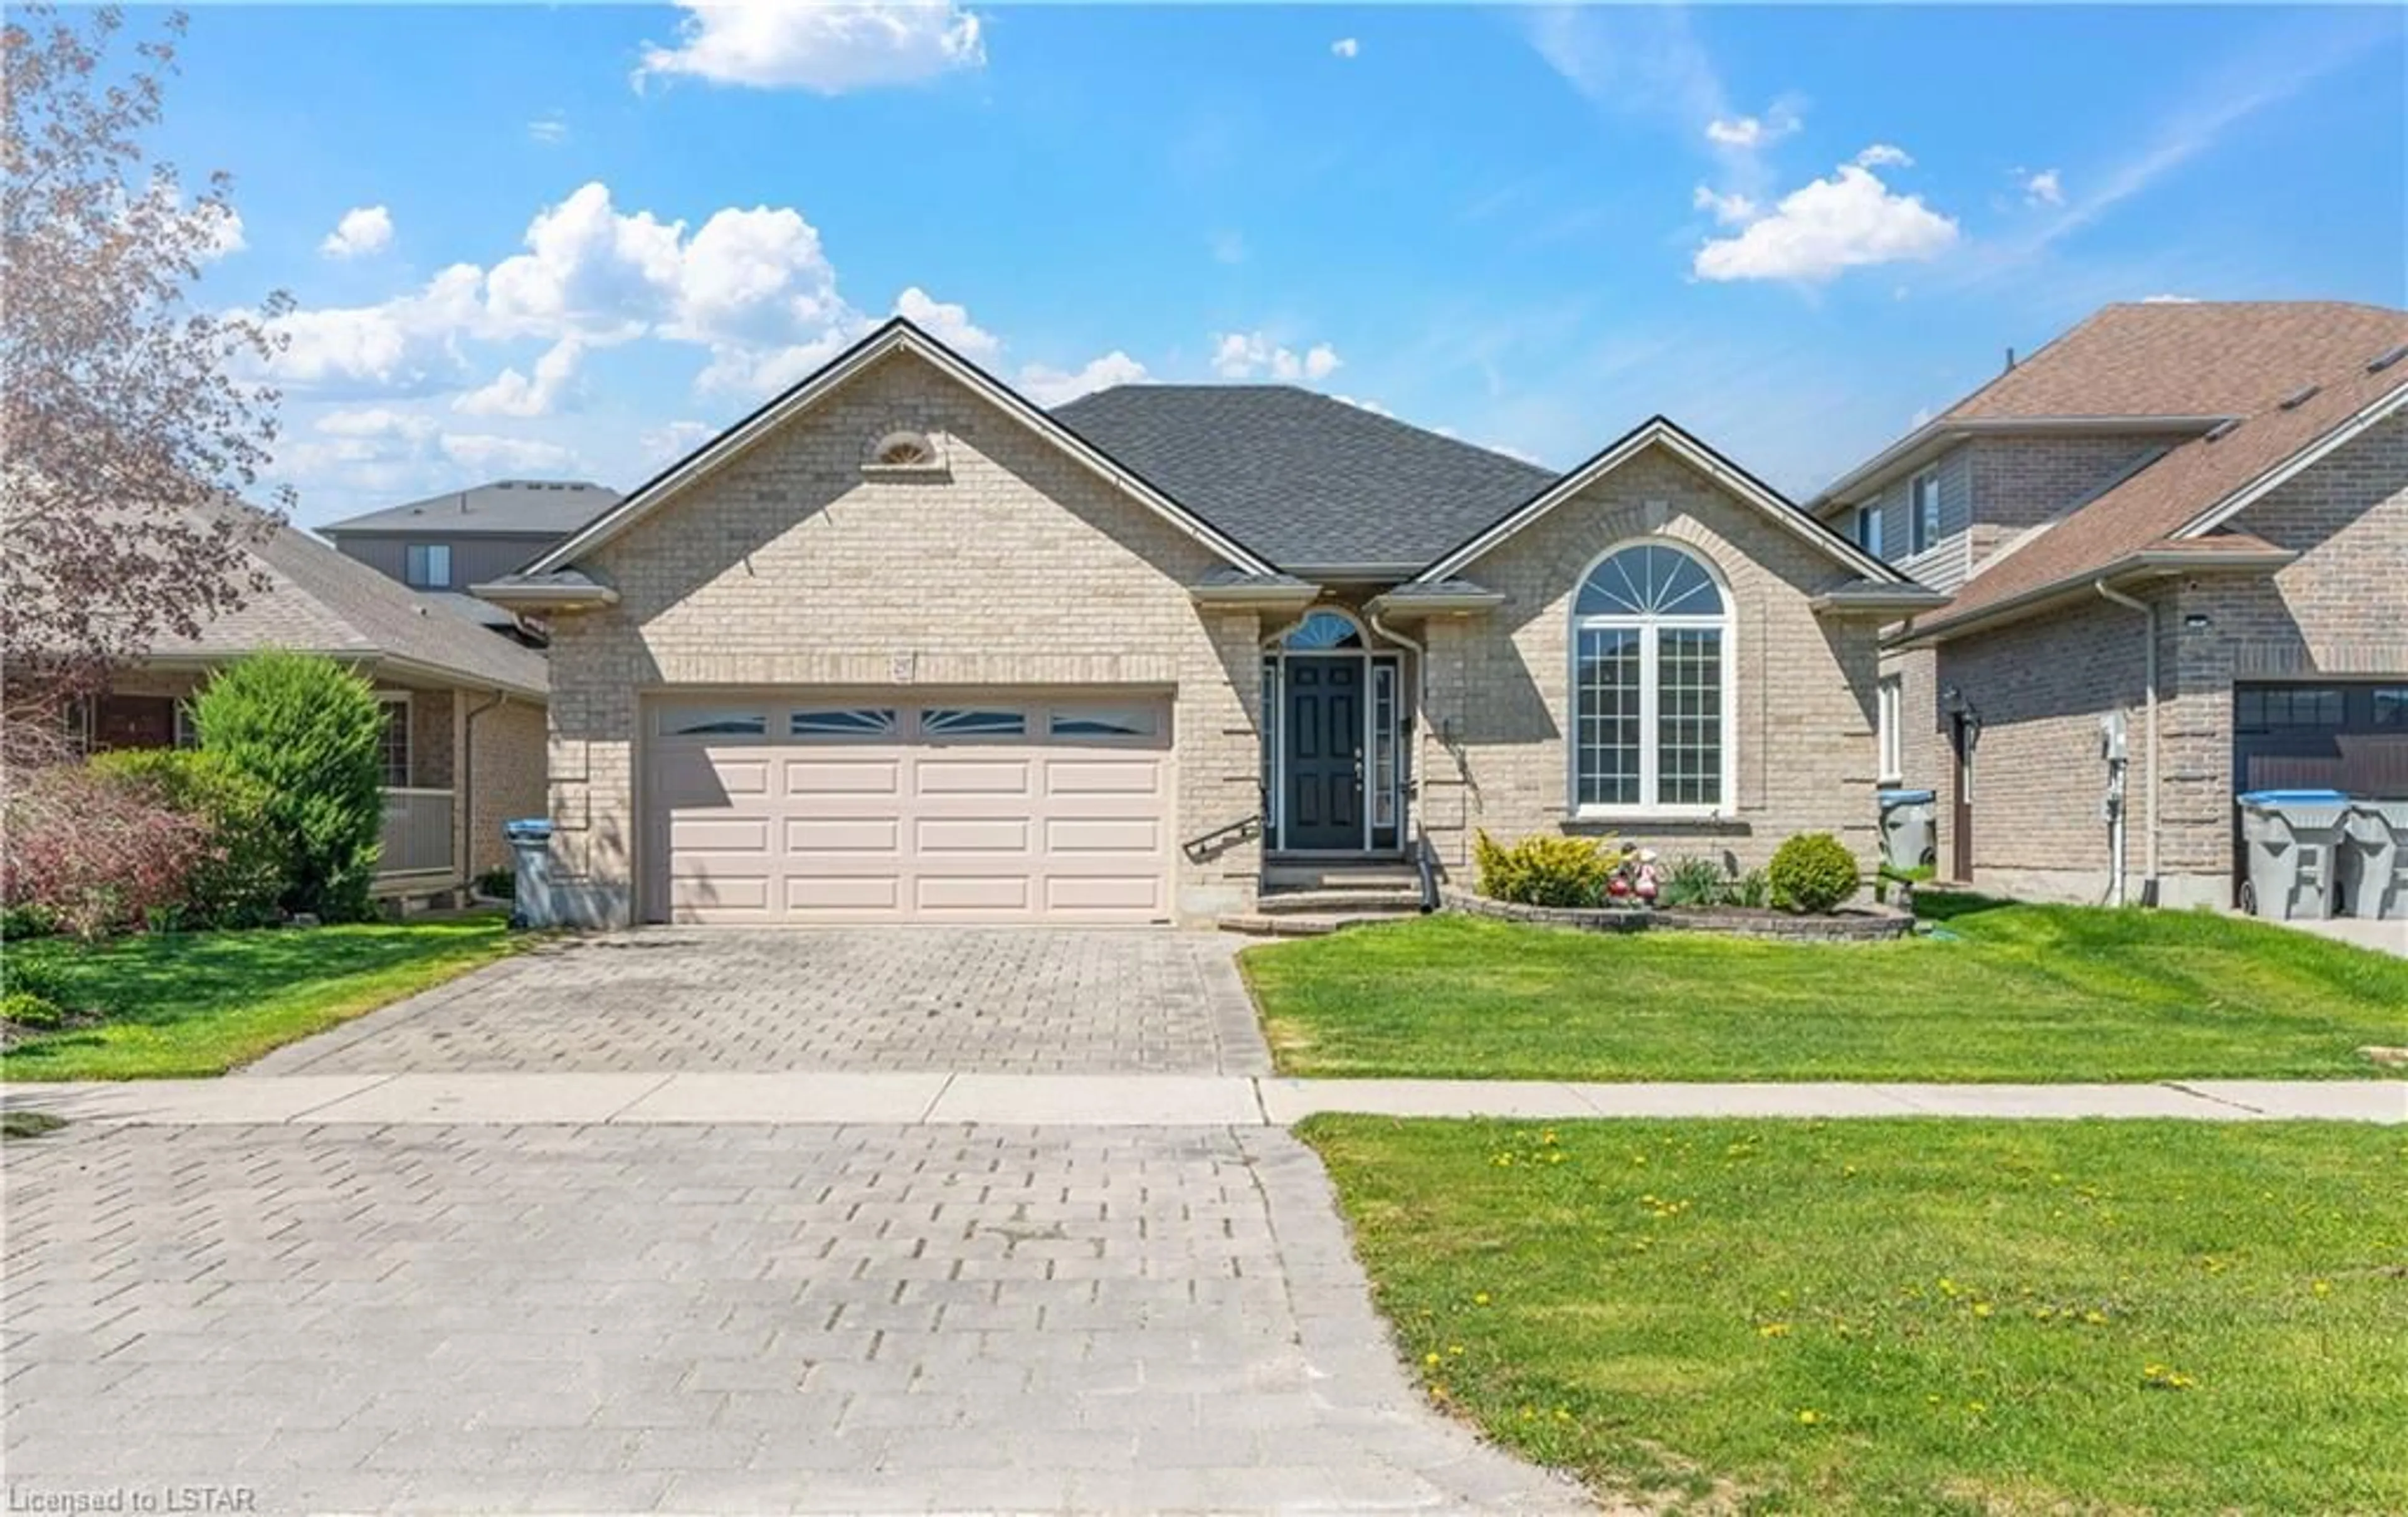 Frontside or backside of a home for 297 Thorn Dr, Strathroy Ontario N7G 4E1